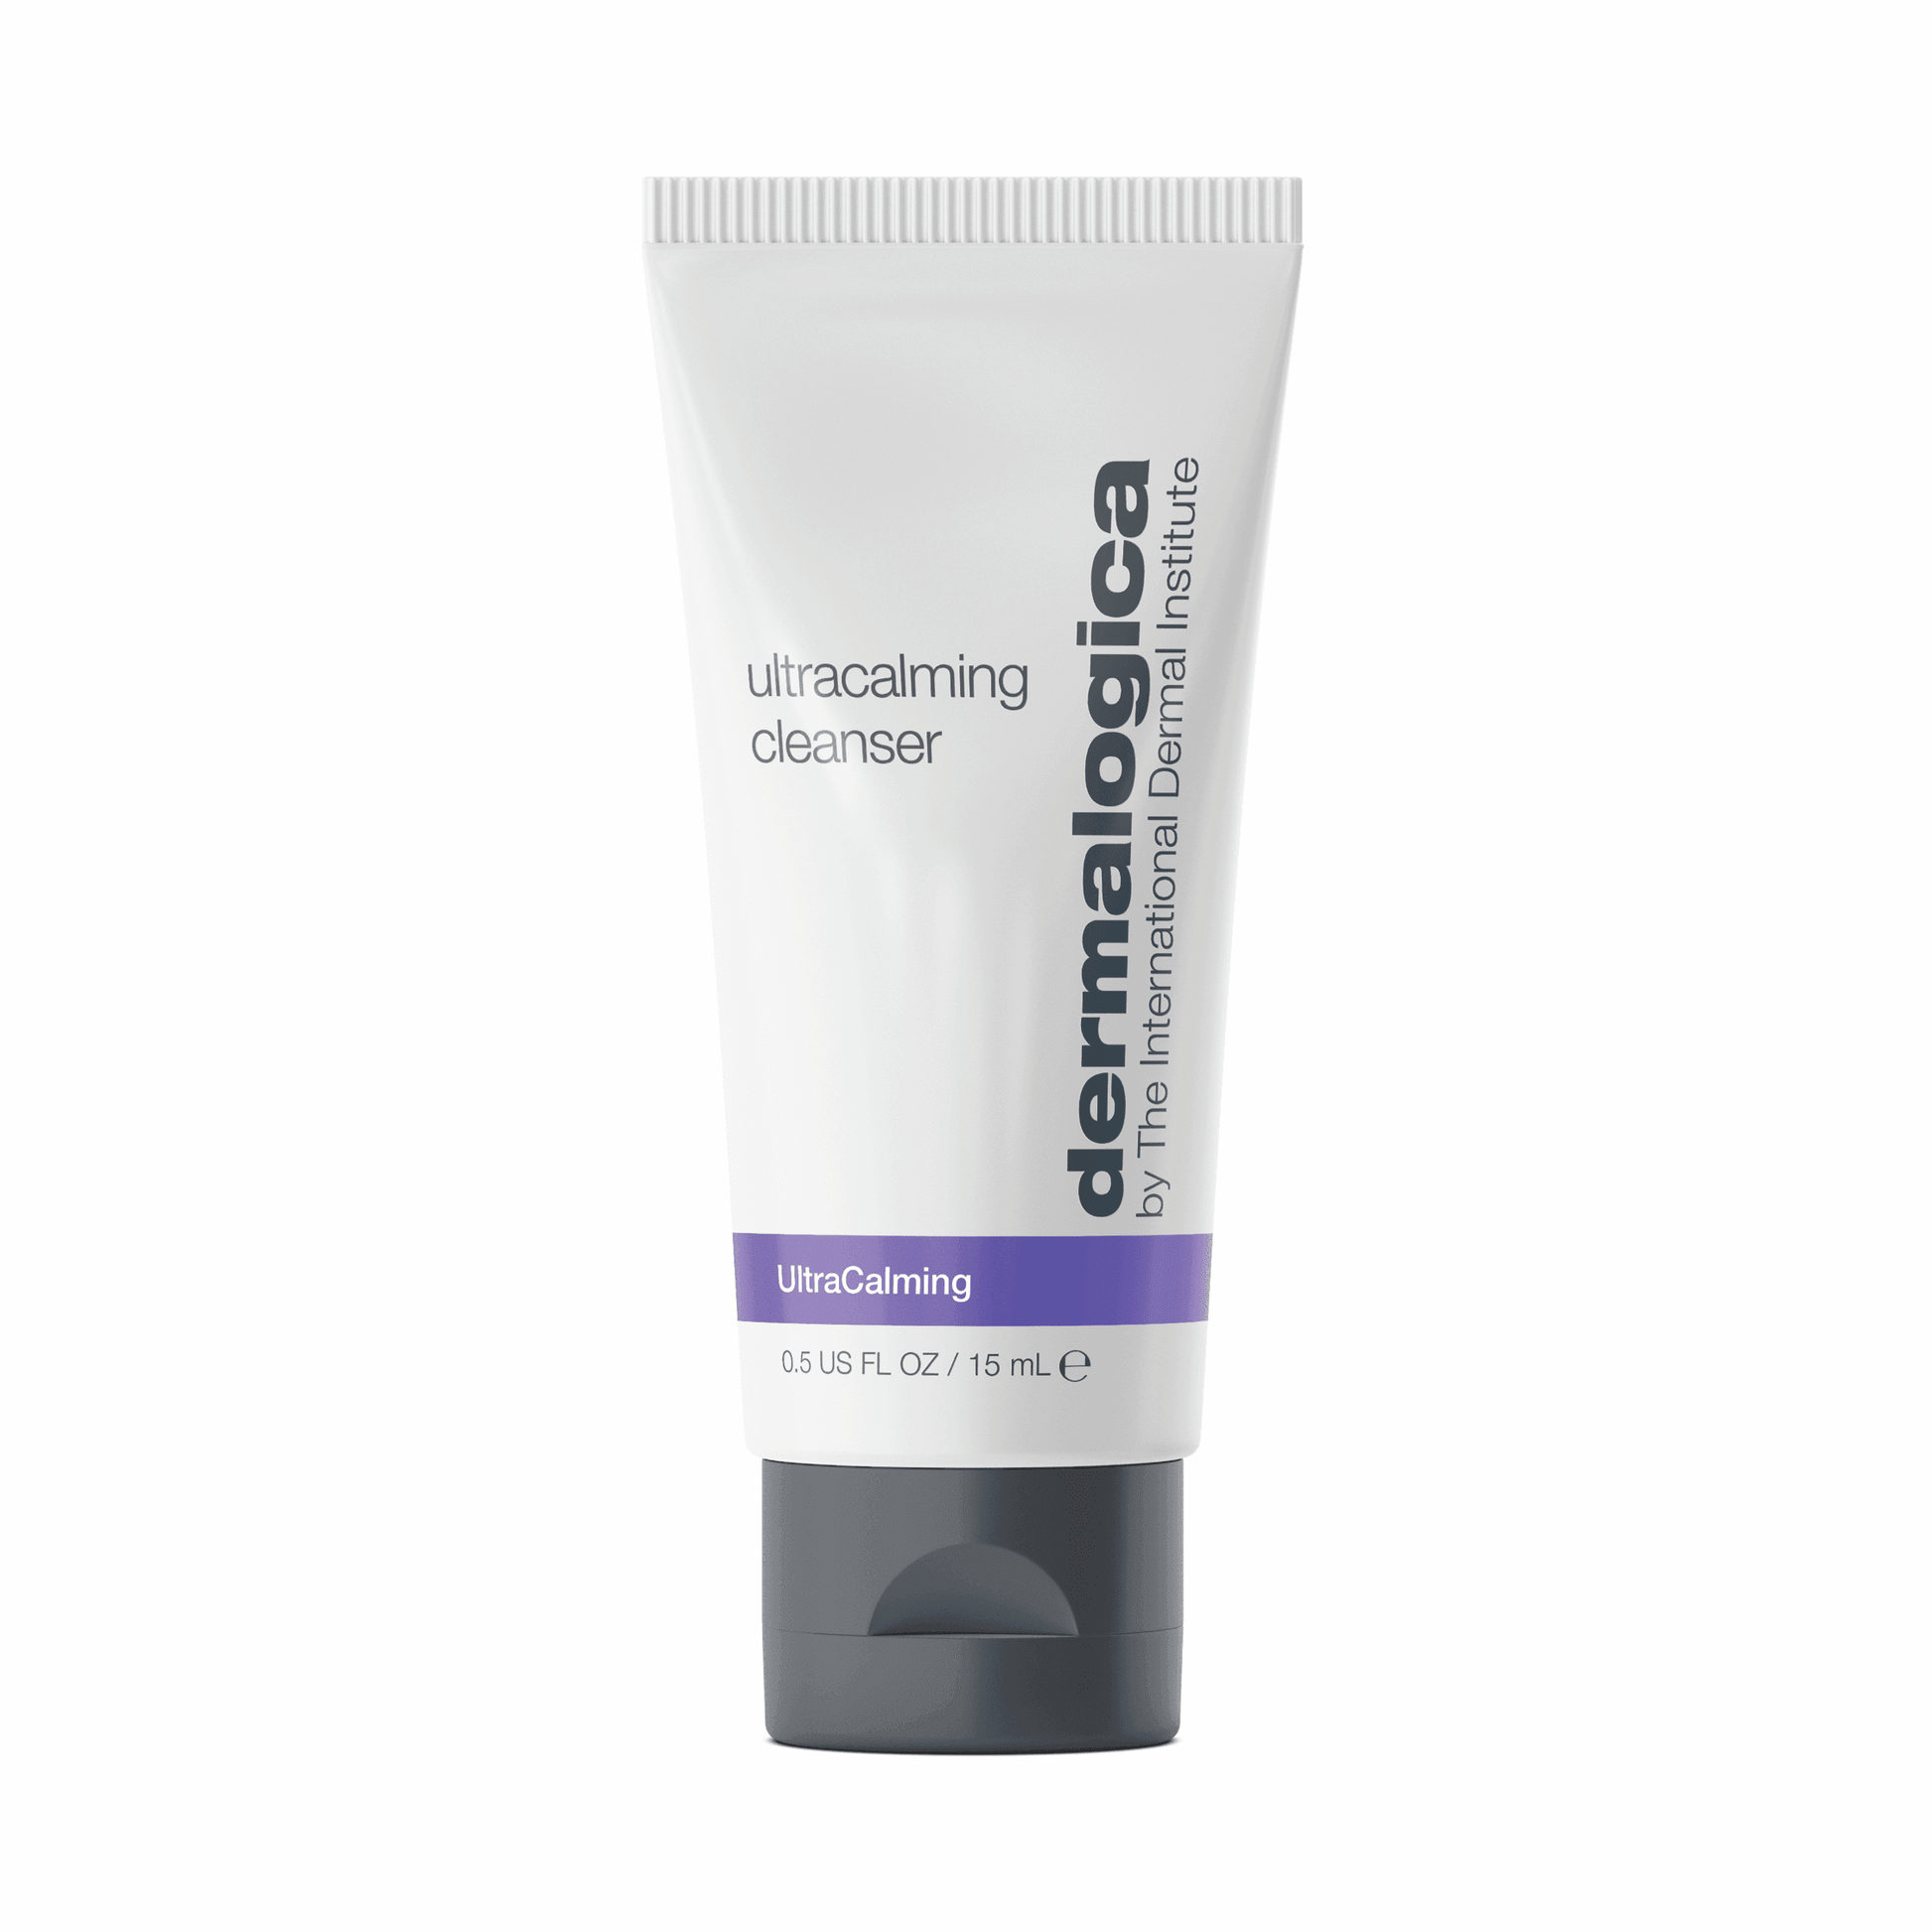 Ultracalming Cleanser trial 7ml - Dermalogica Singapore